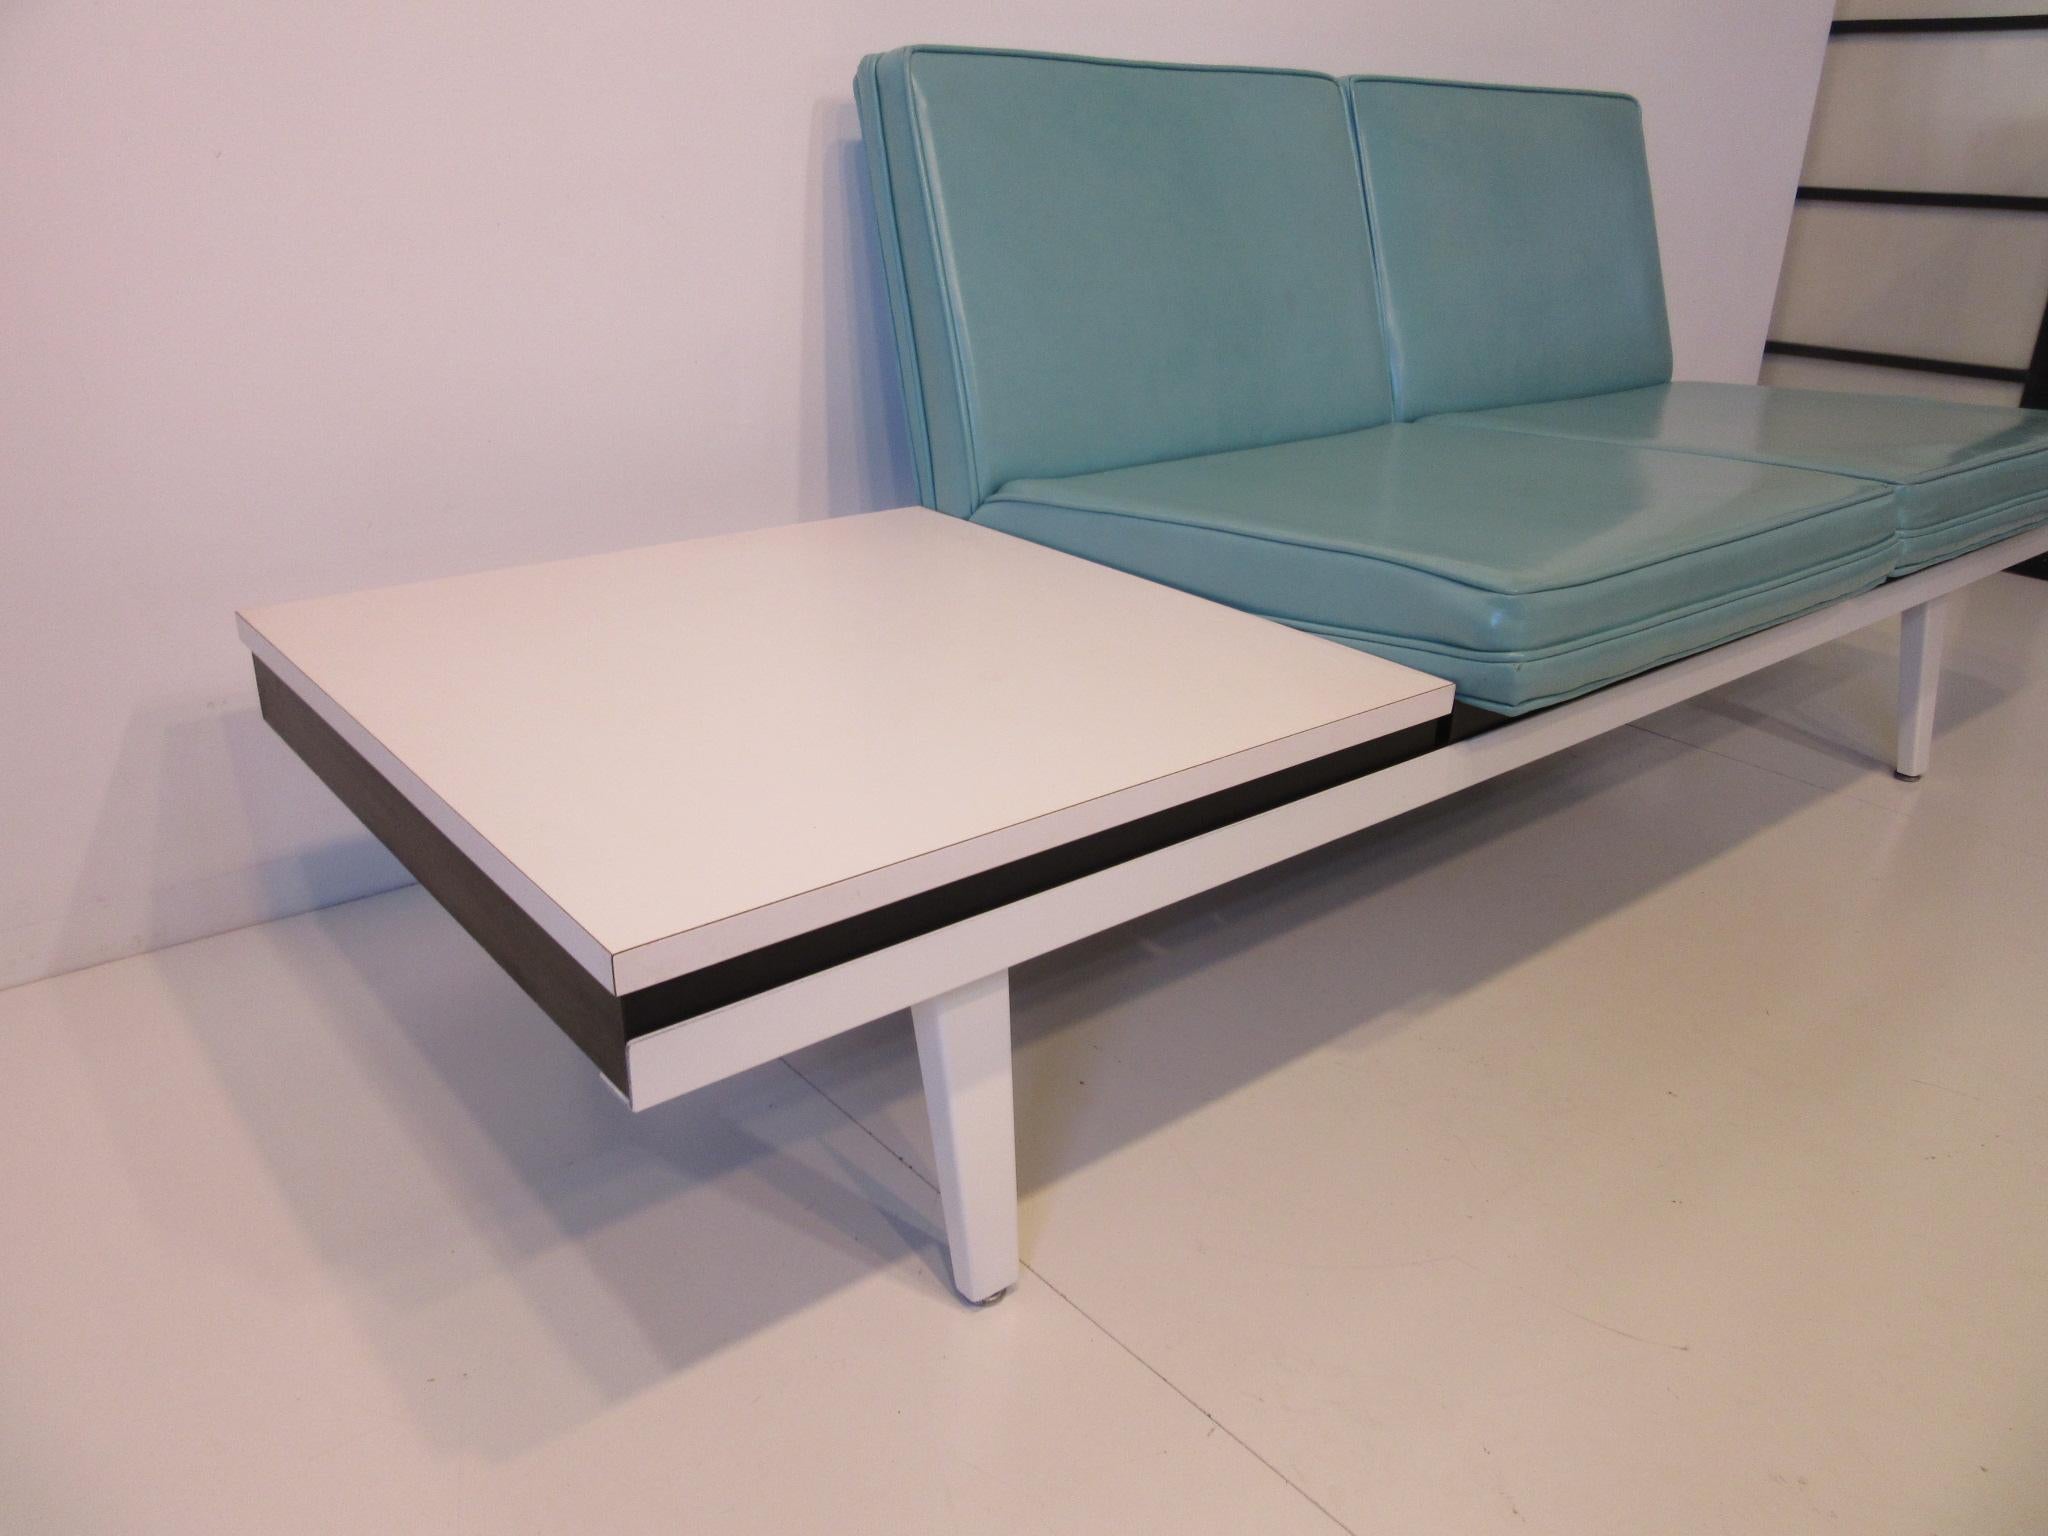 A stain white steel frame Nelson sofa with matching built in side table with white Formica top and wood frame, two turquoise Naugahyde seat cushions sitting on rubber and metal adjustable foot pads. Manufactured by the Herman Miller furniture